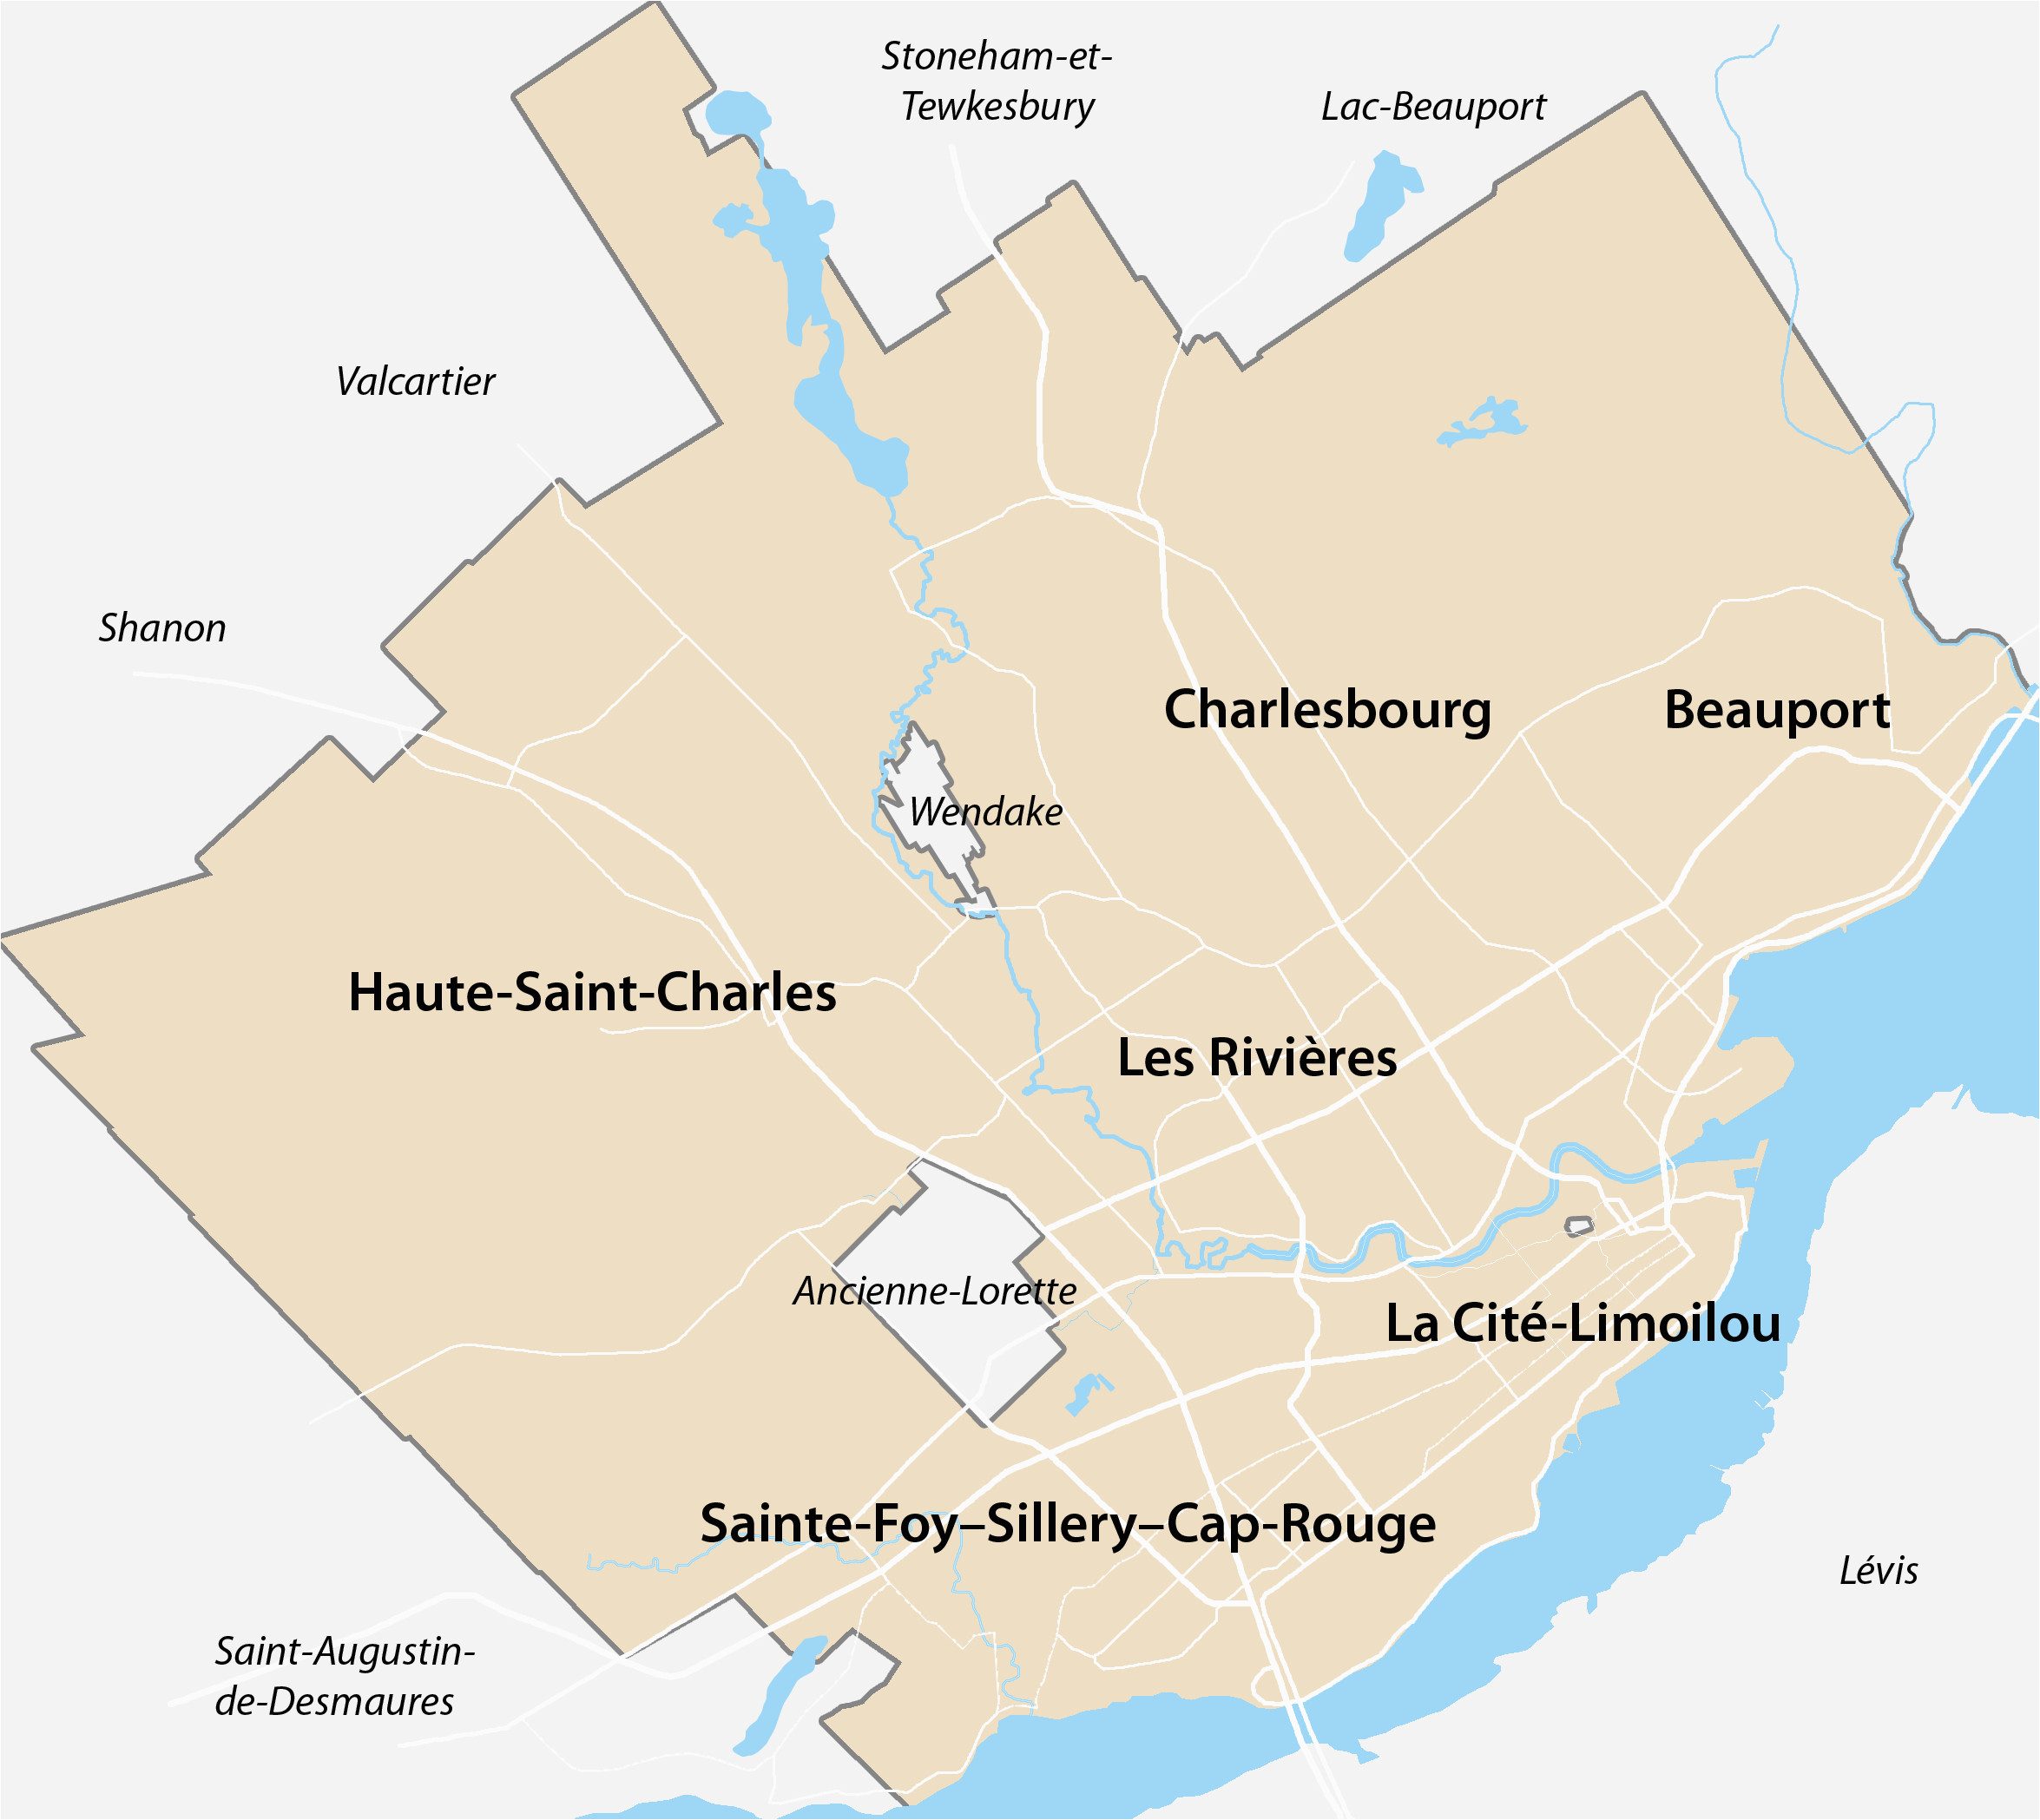 quebec city mosque shooting wikipedia